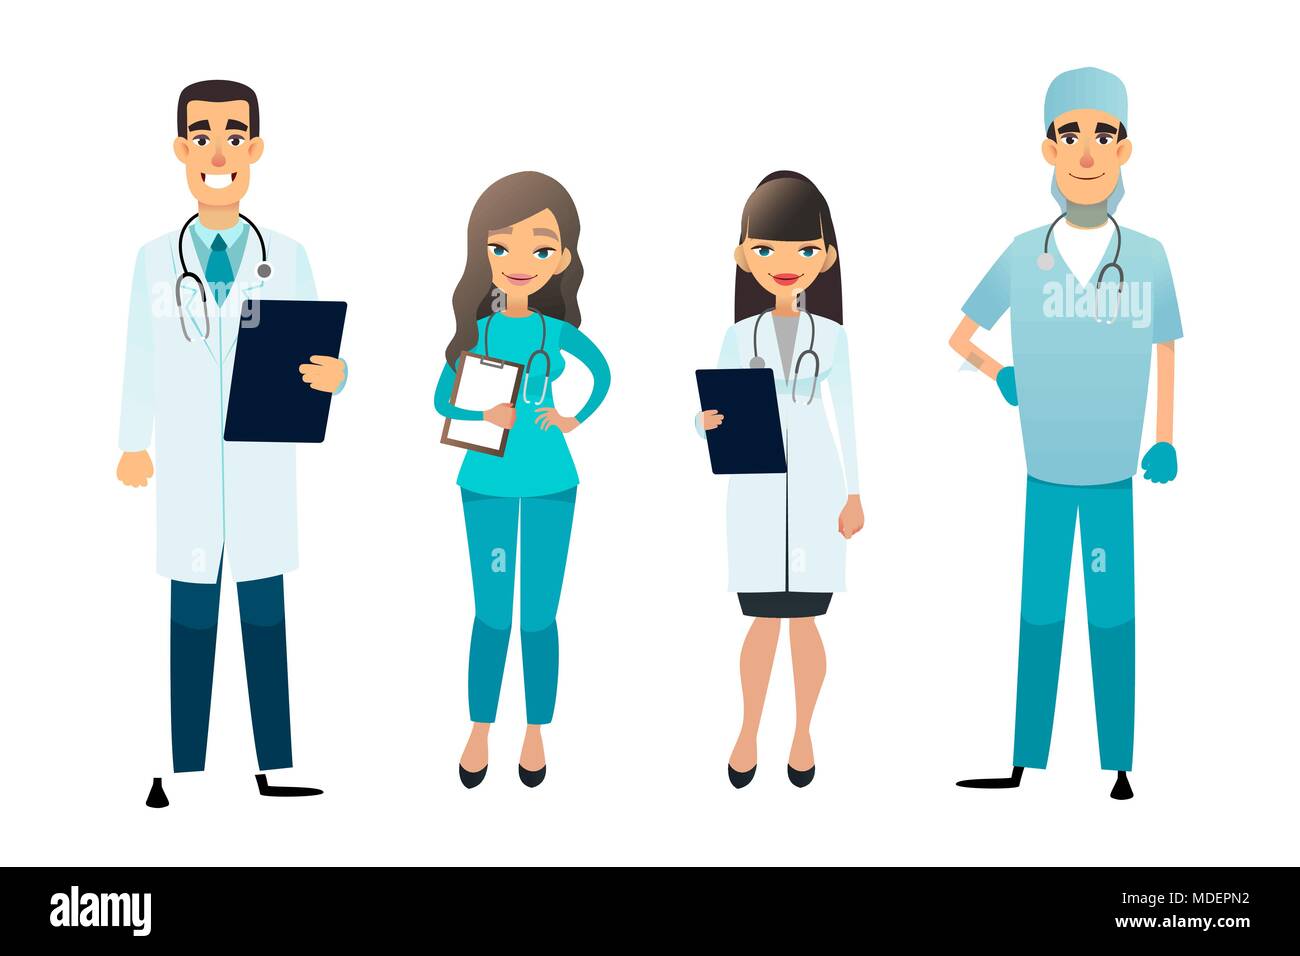 Doctors and nurses team. Cartoon medical staff. Medical team concept. Surgeon, nurse and therapist on hospital. Professional health workers. Stock Vector